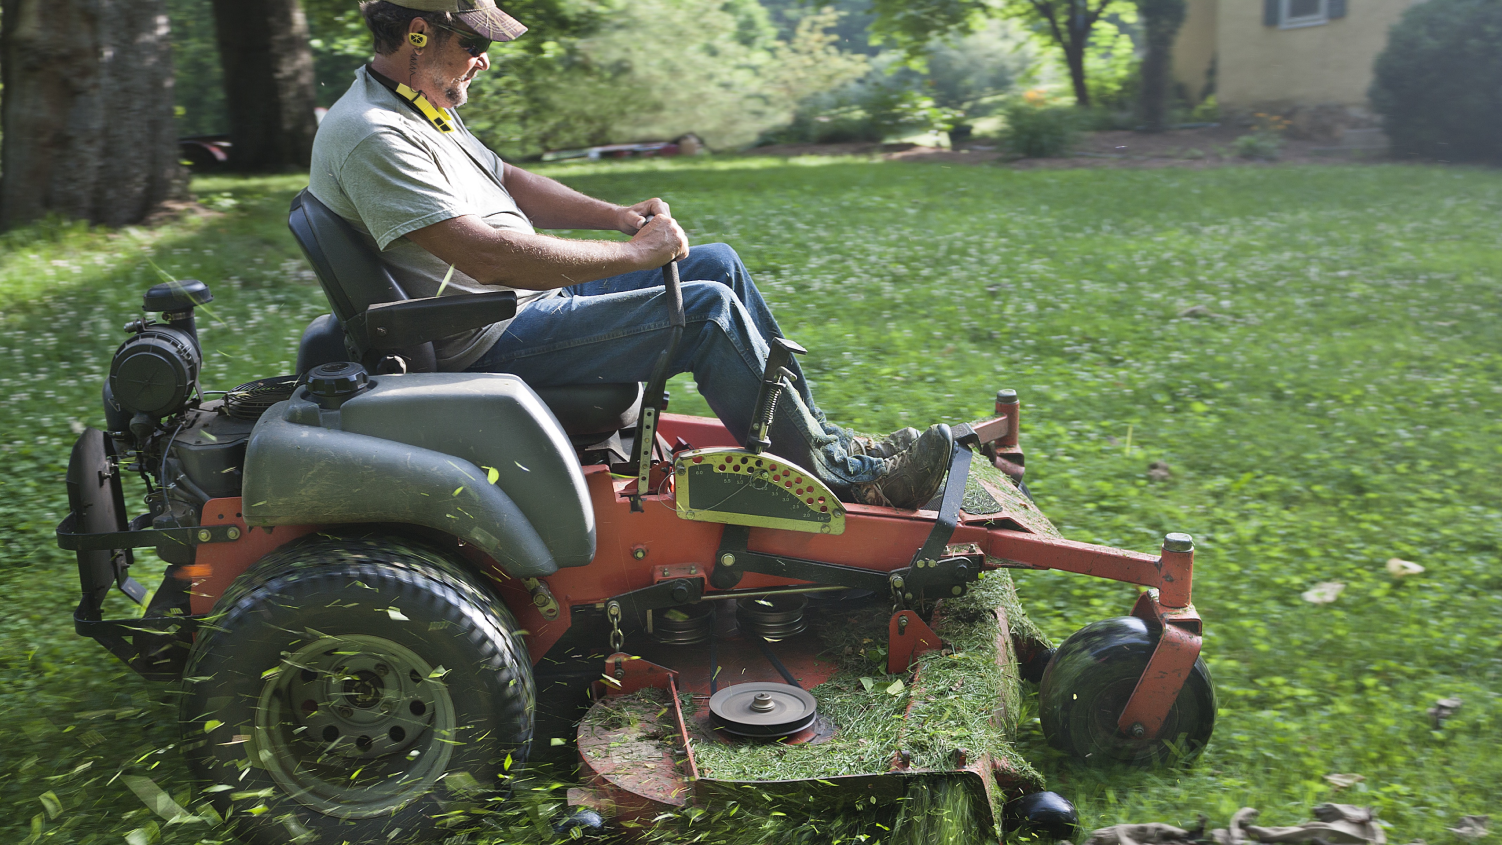 Man with headphones on riding lawn mower